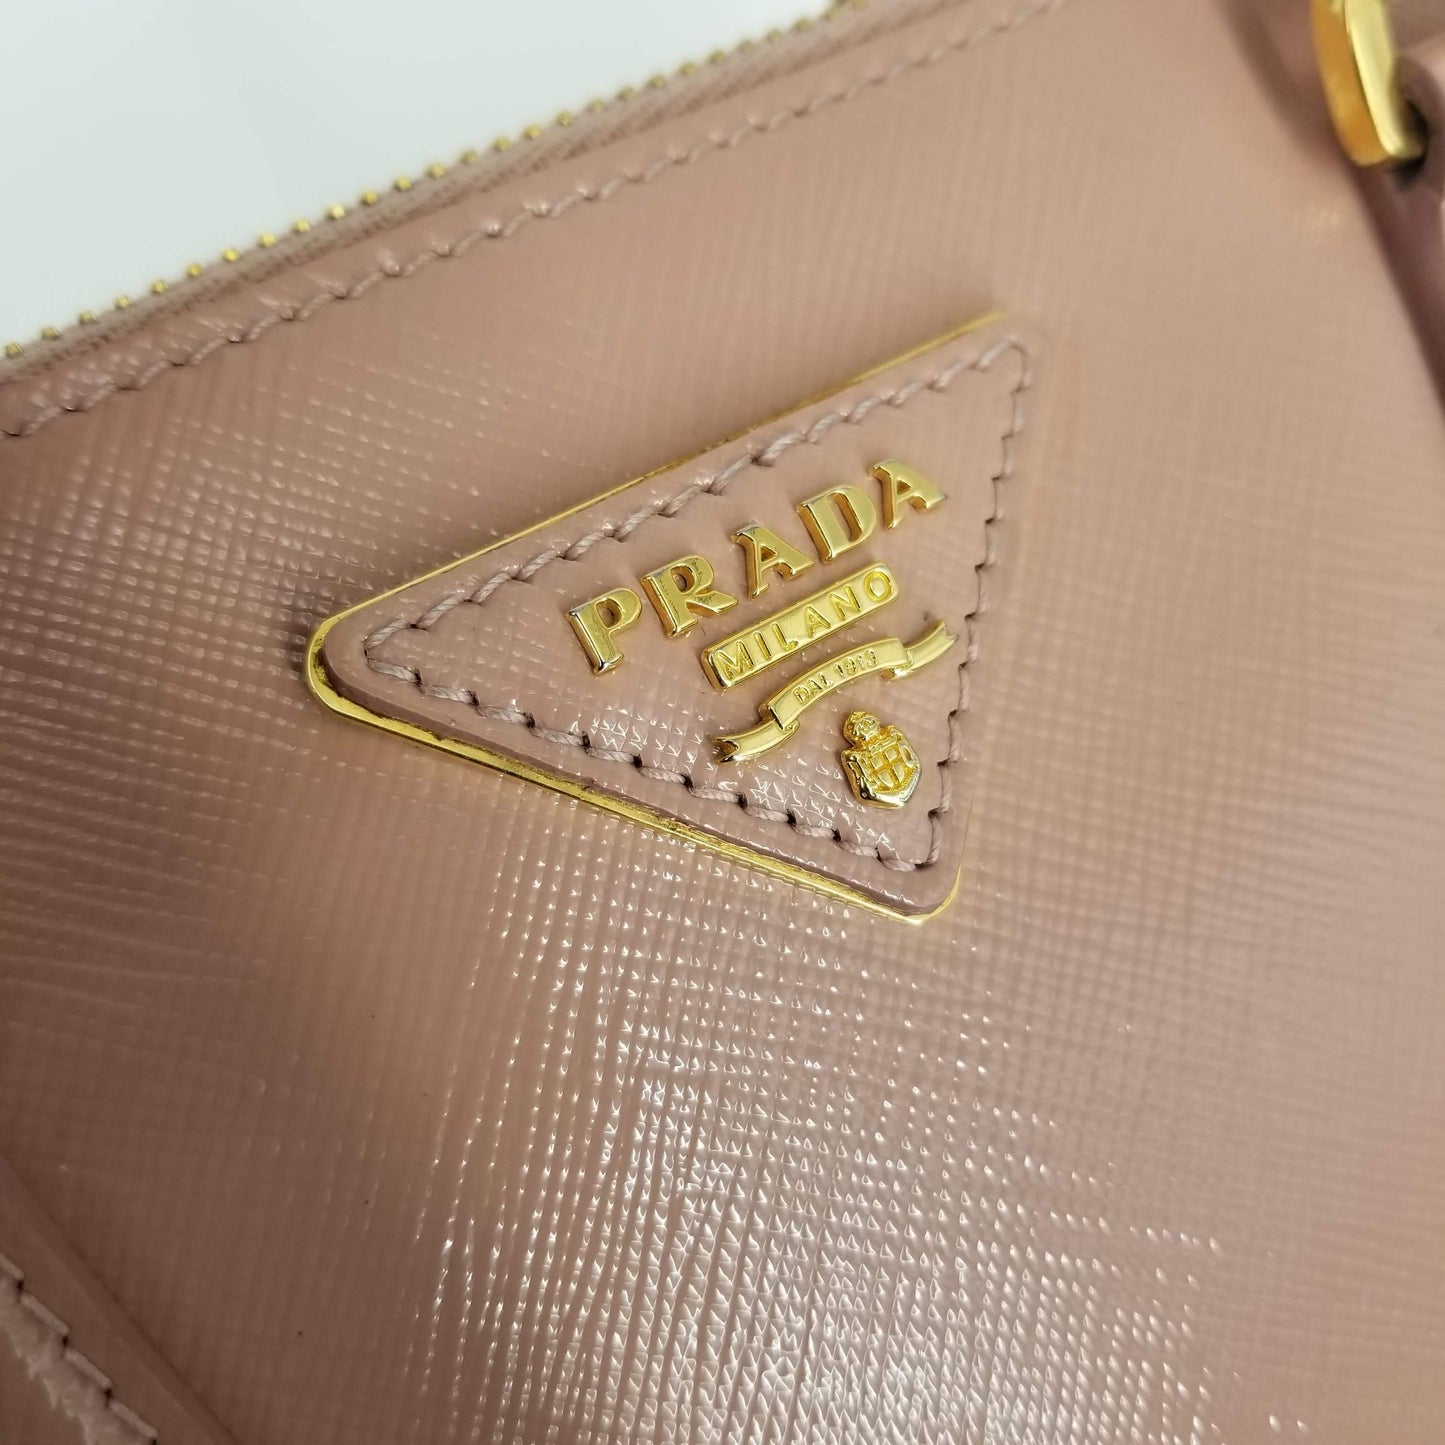 Authentic Prada Small Powder Pink Lux Double Zip Bag